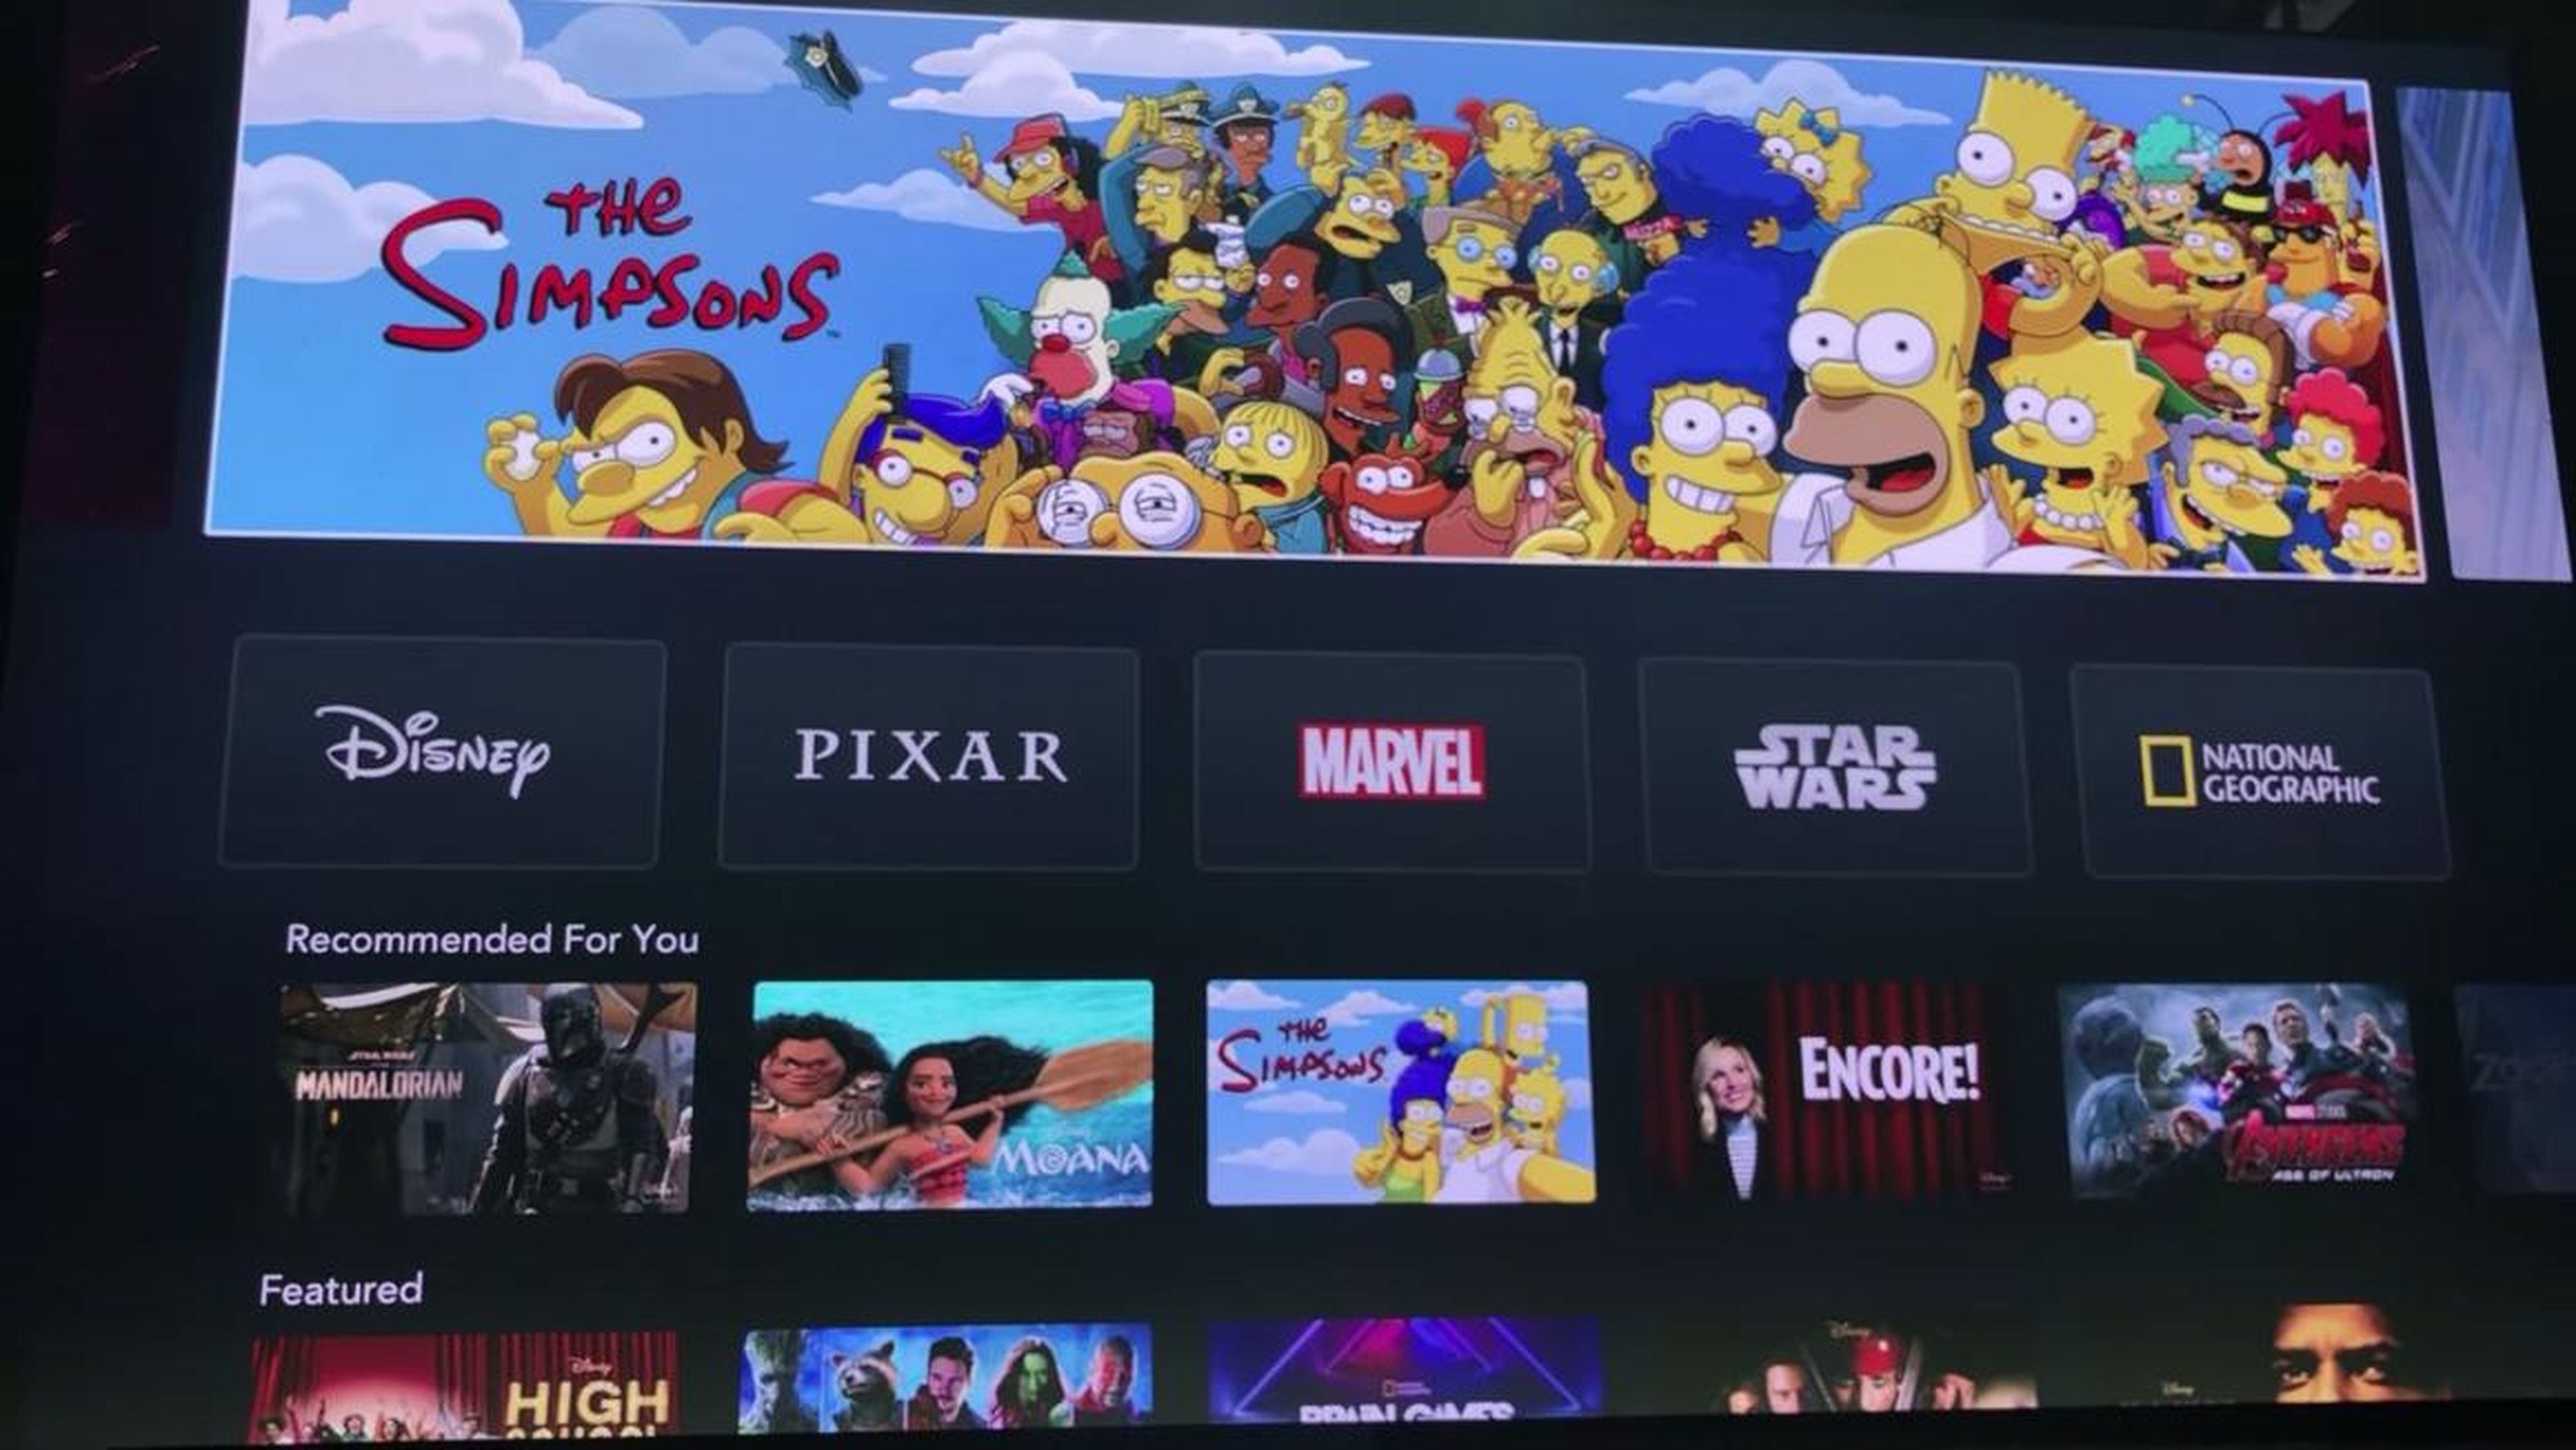 You can scroll along the top to see featured items, including new movies like "Captain Marvel" and fan favorites like "The Simpsons."